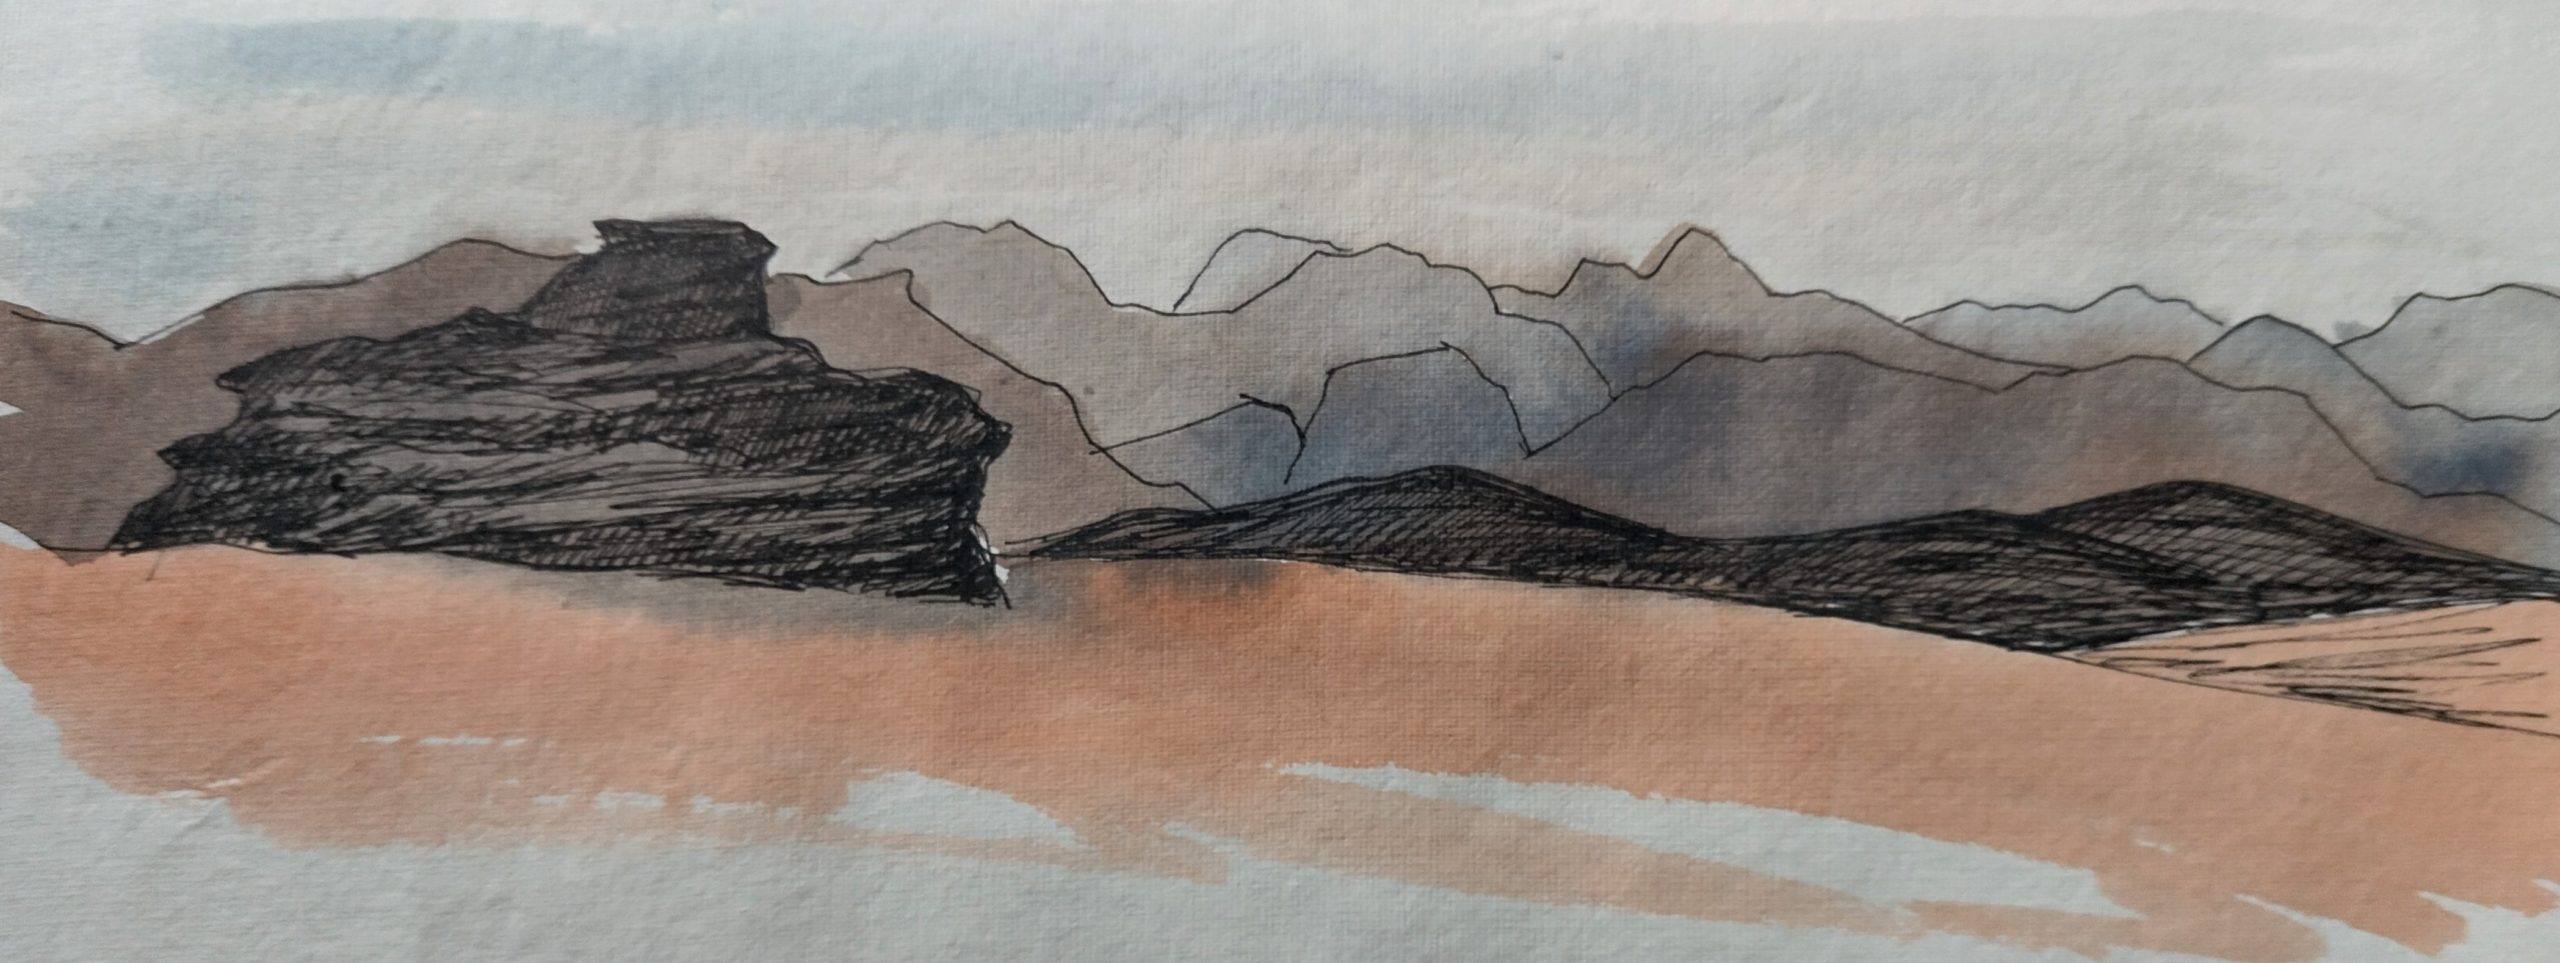 Crumpled mountains sketch